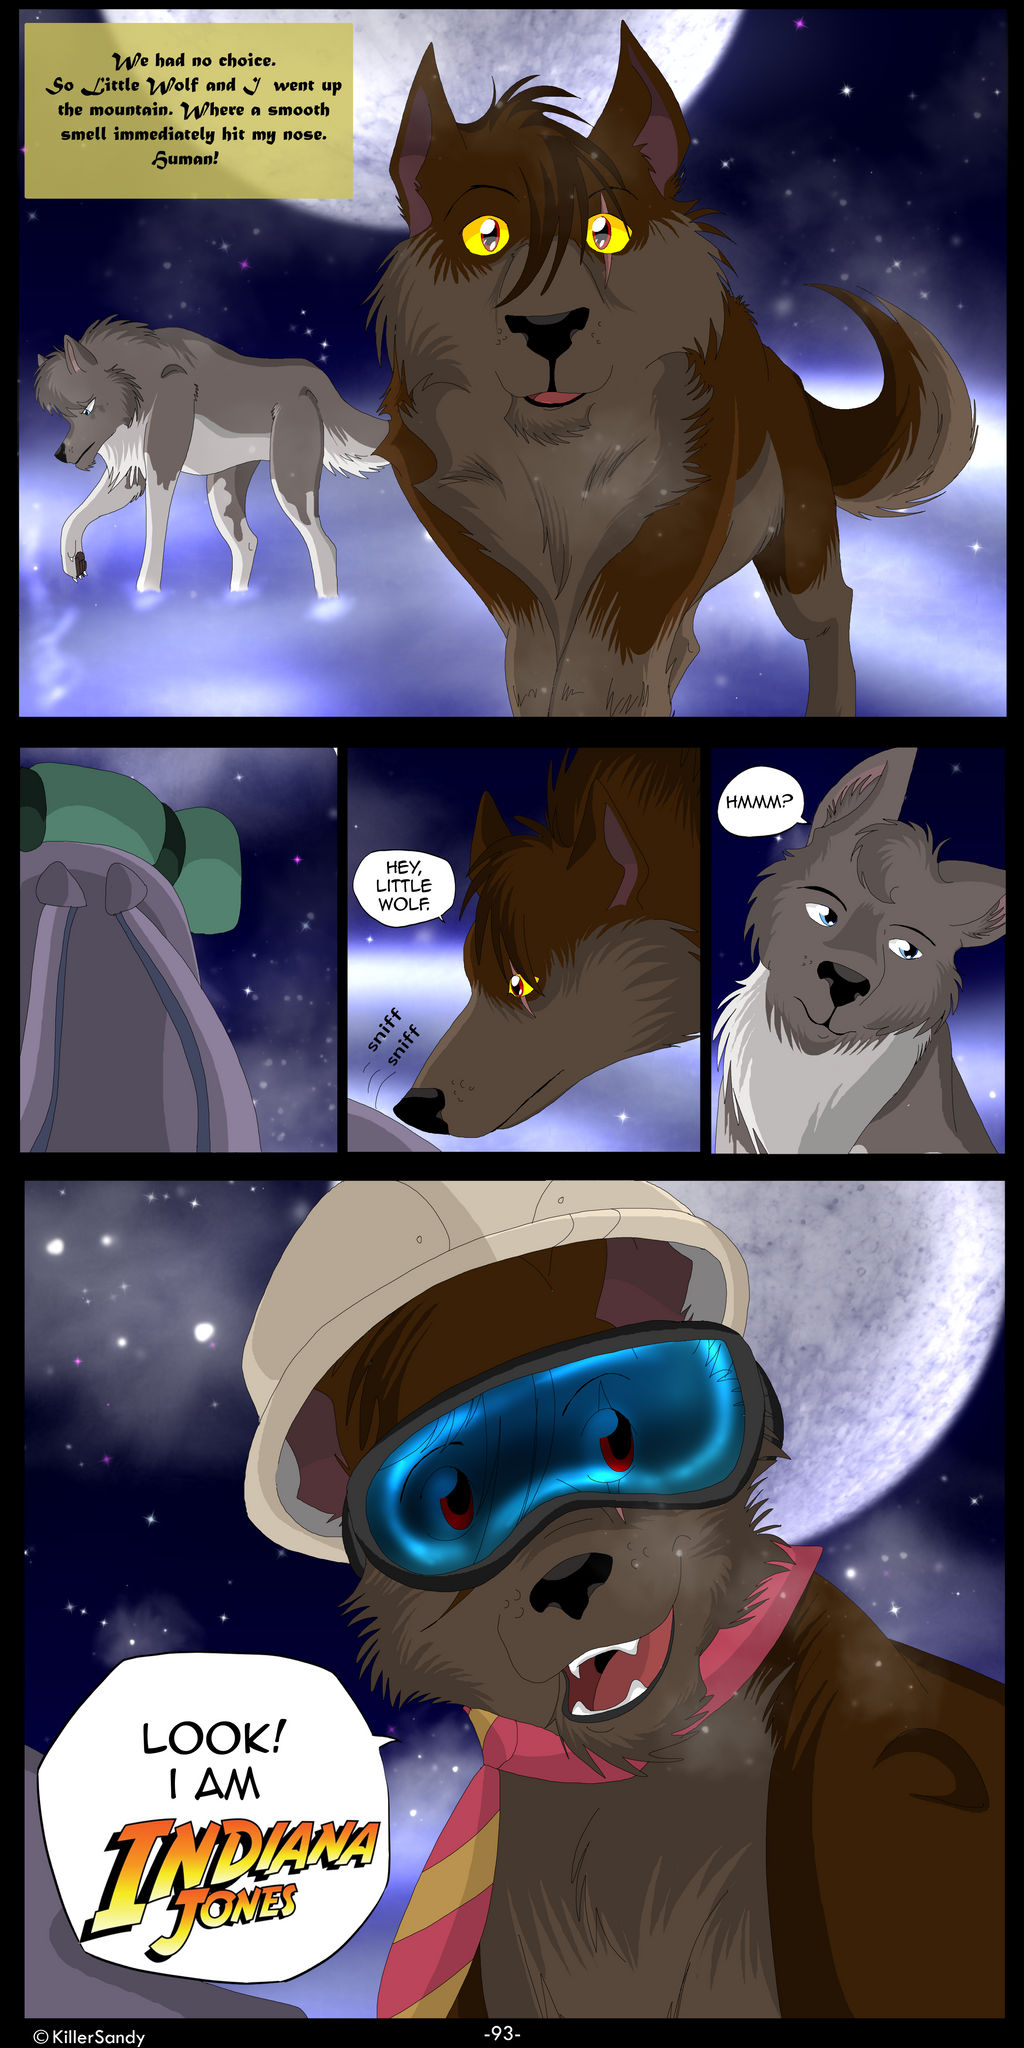 The Prince of the Moonlight Stone page 93